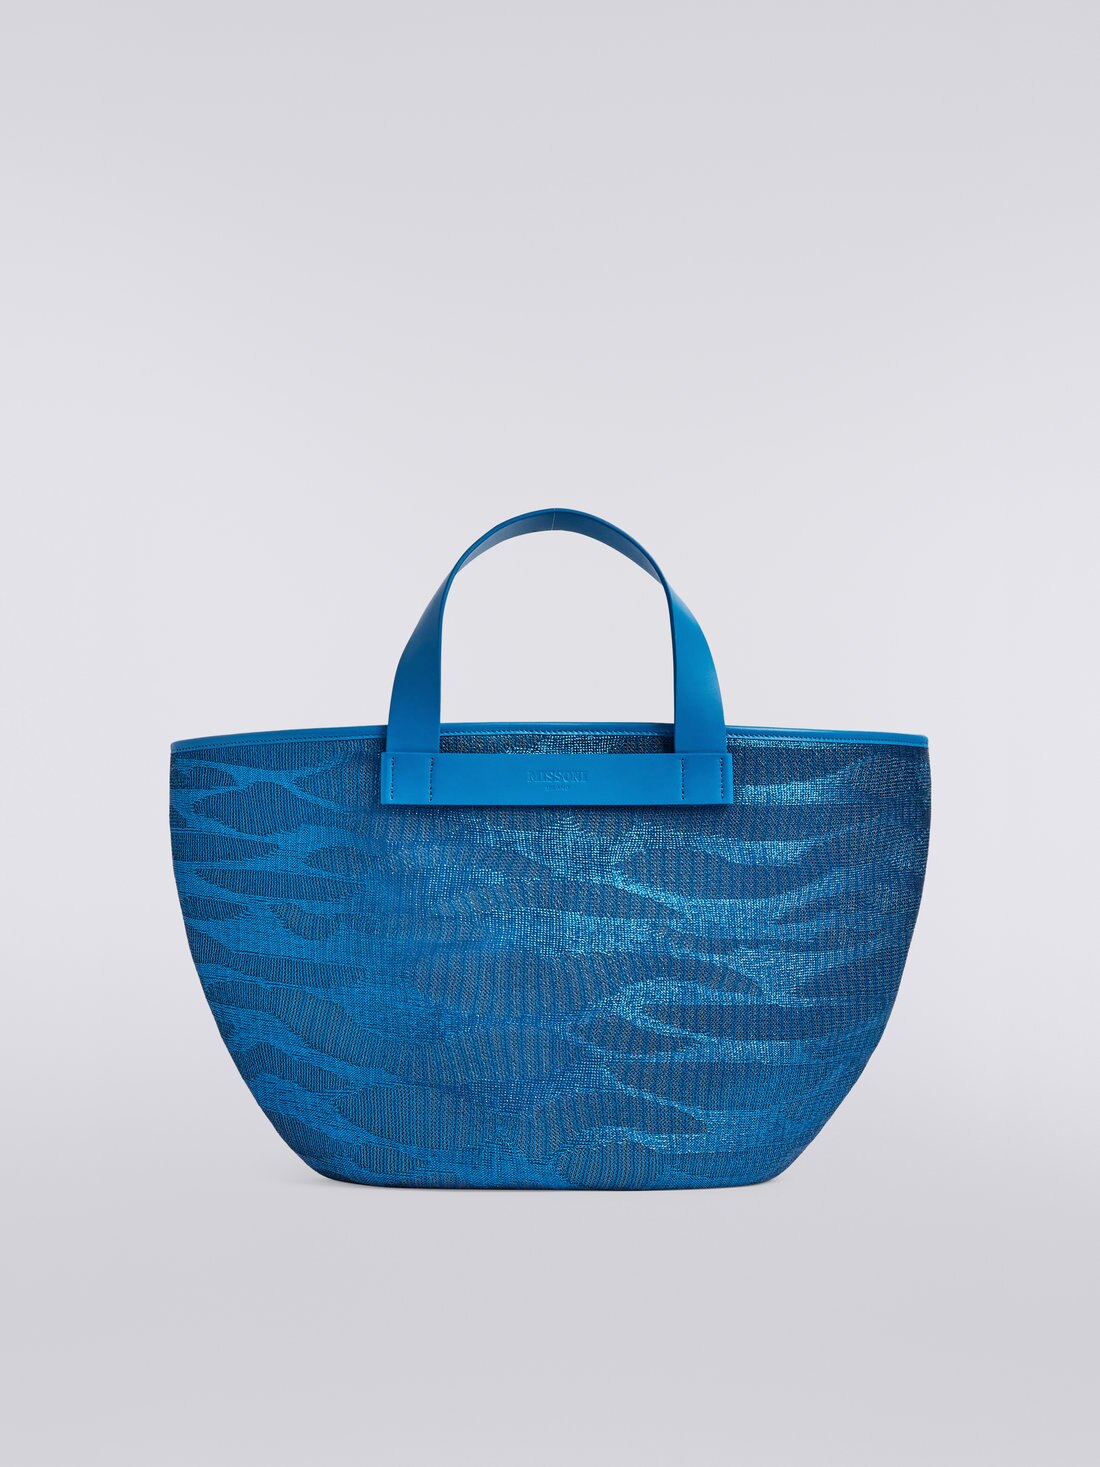 Jacquard viscose knit tote with leather handles, Blue - 8051575966187 - 0